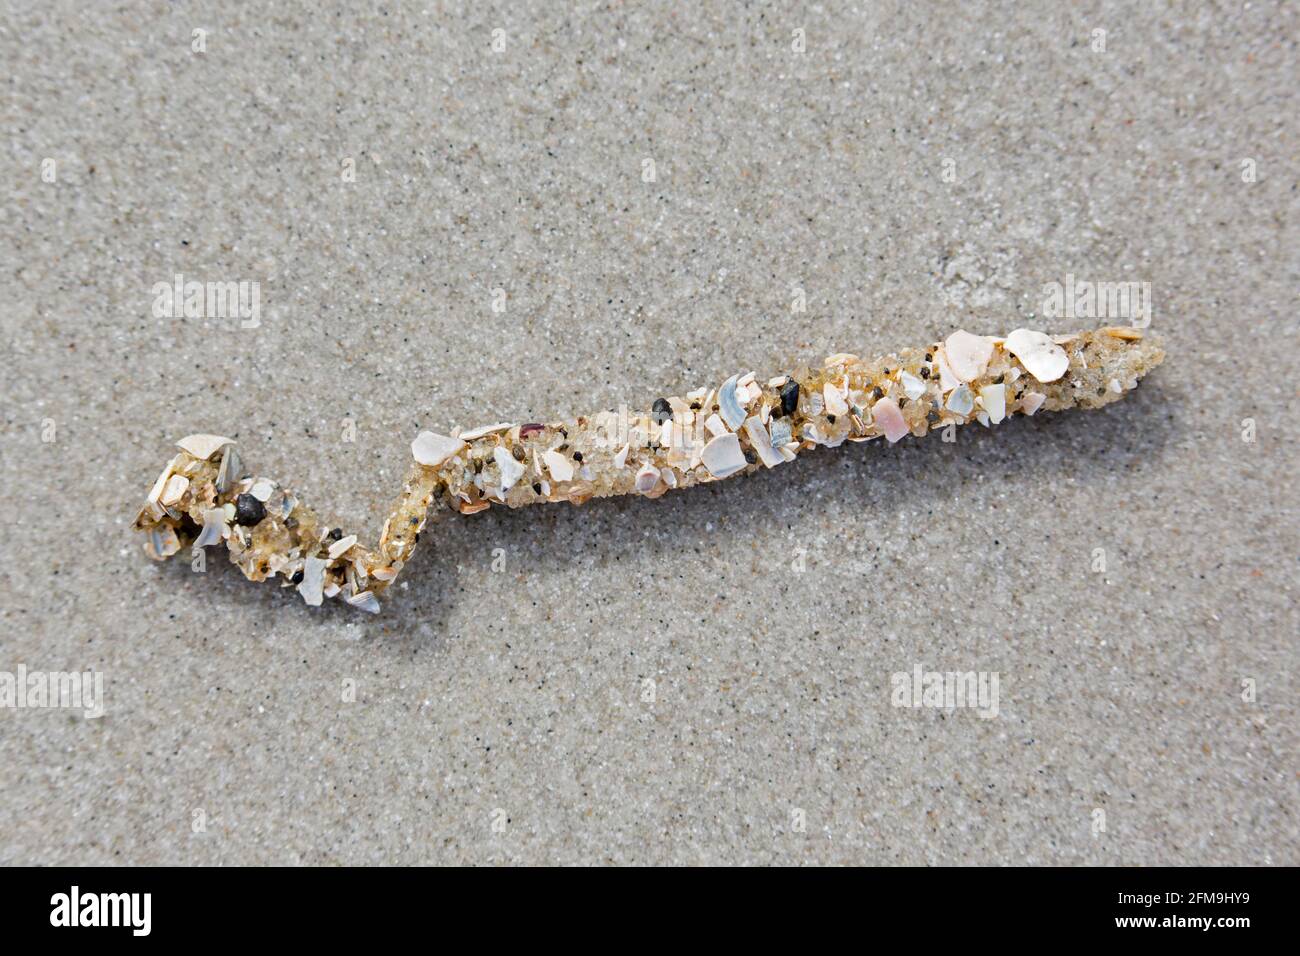 Tubes debris showing cemented sand grains and shell fragments from sand mason worms (Lanice conchilega) washed ashore on sandy beach Stock Photo